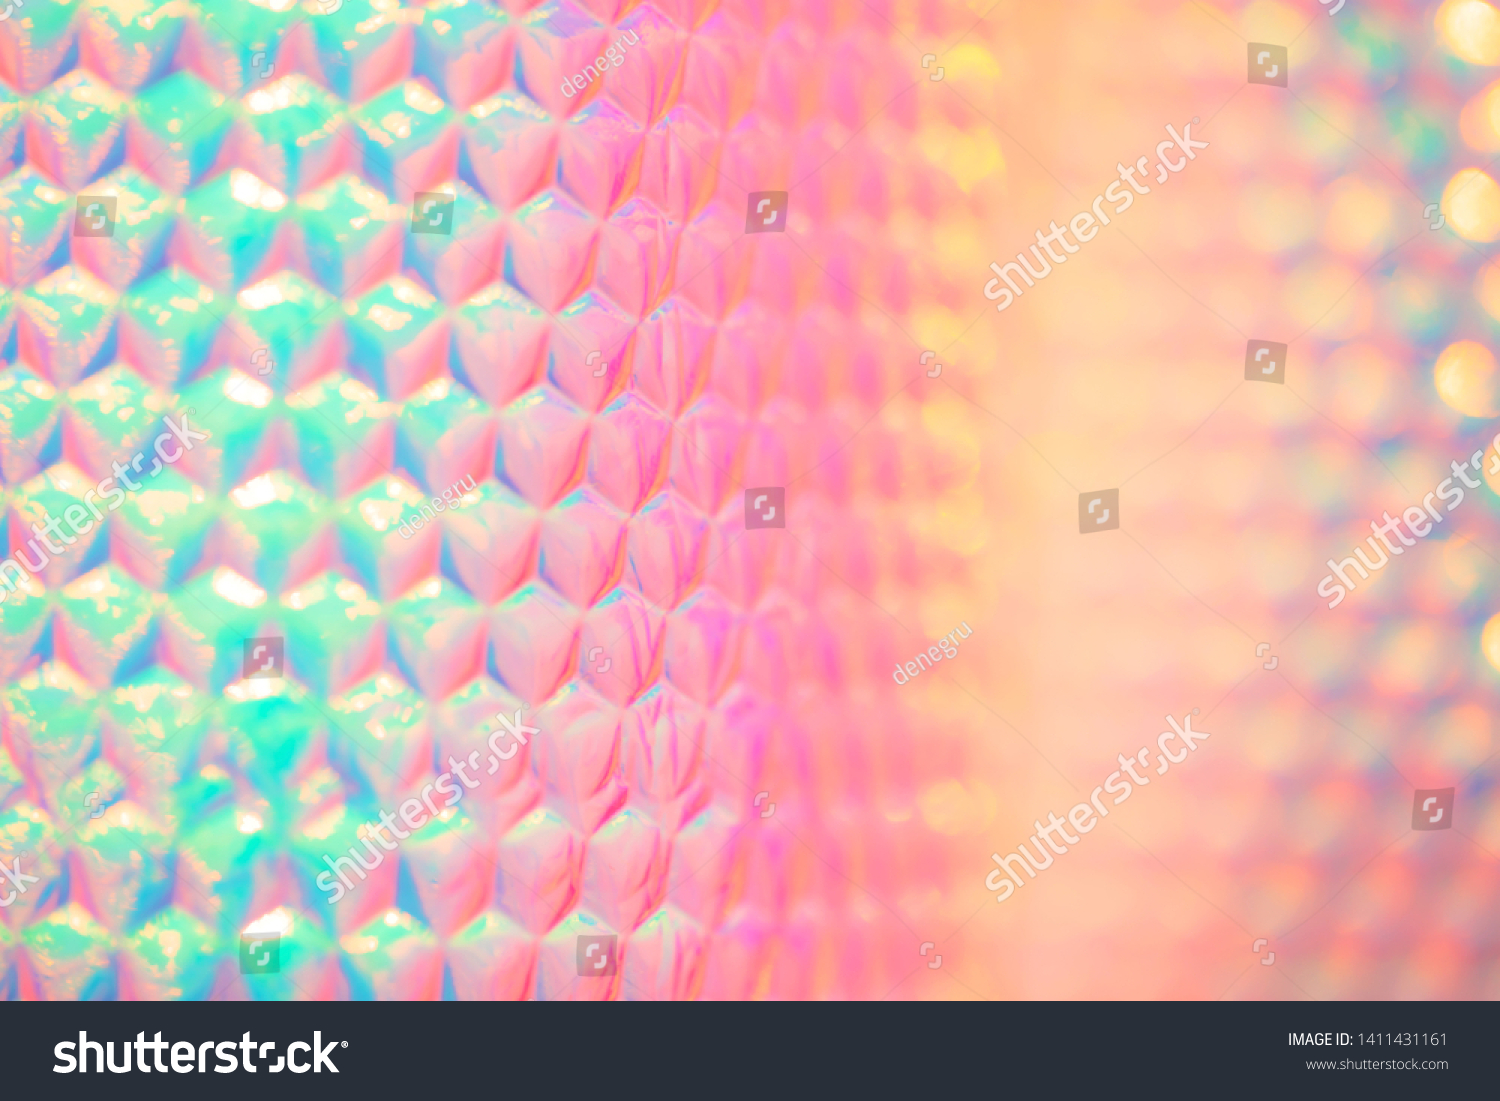 Holographic 90s retro rainbow neon candy colored abstract wallpaper background texture with smooth geometric pattern #1411431161